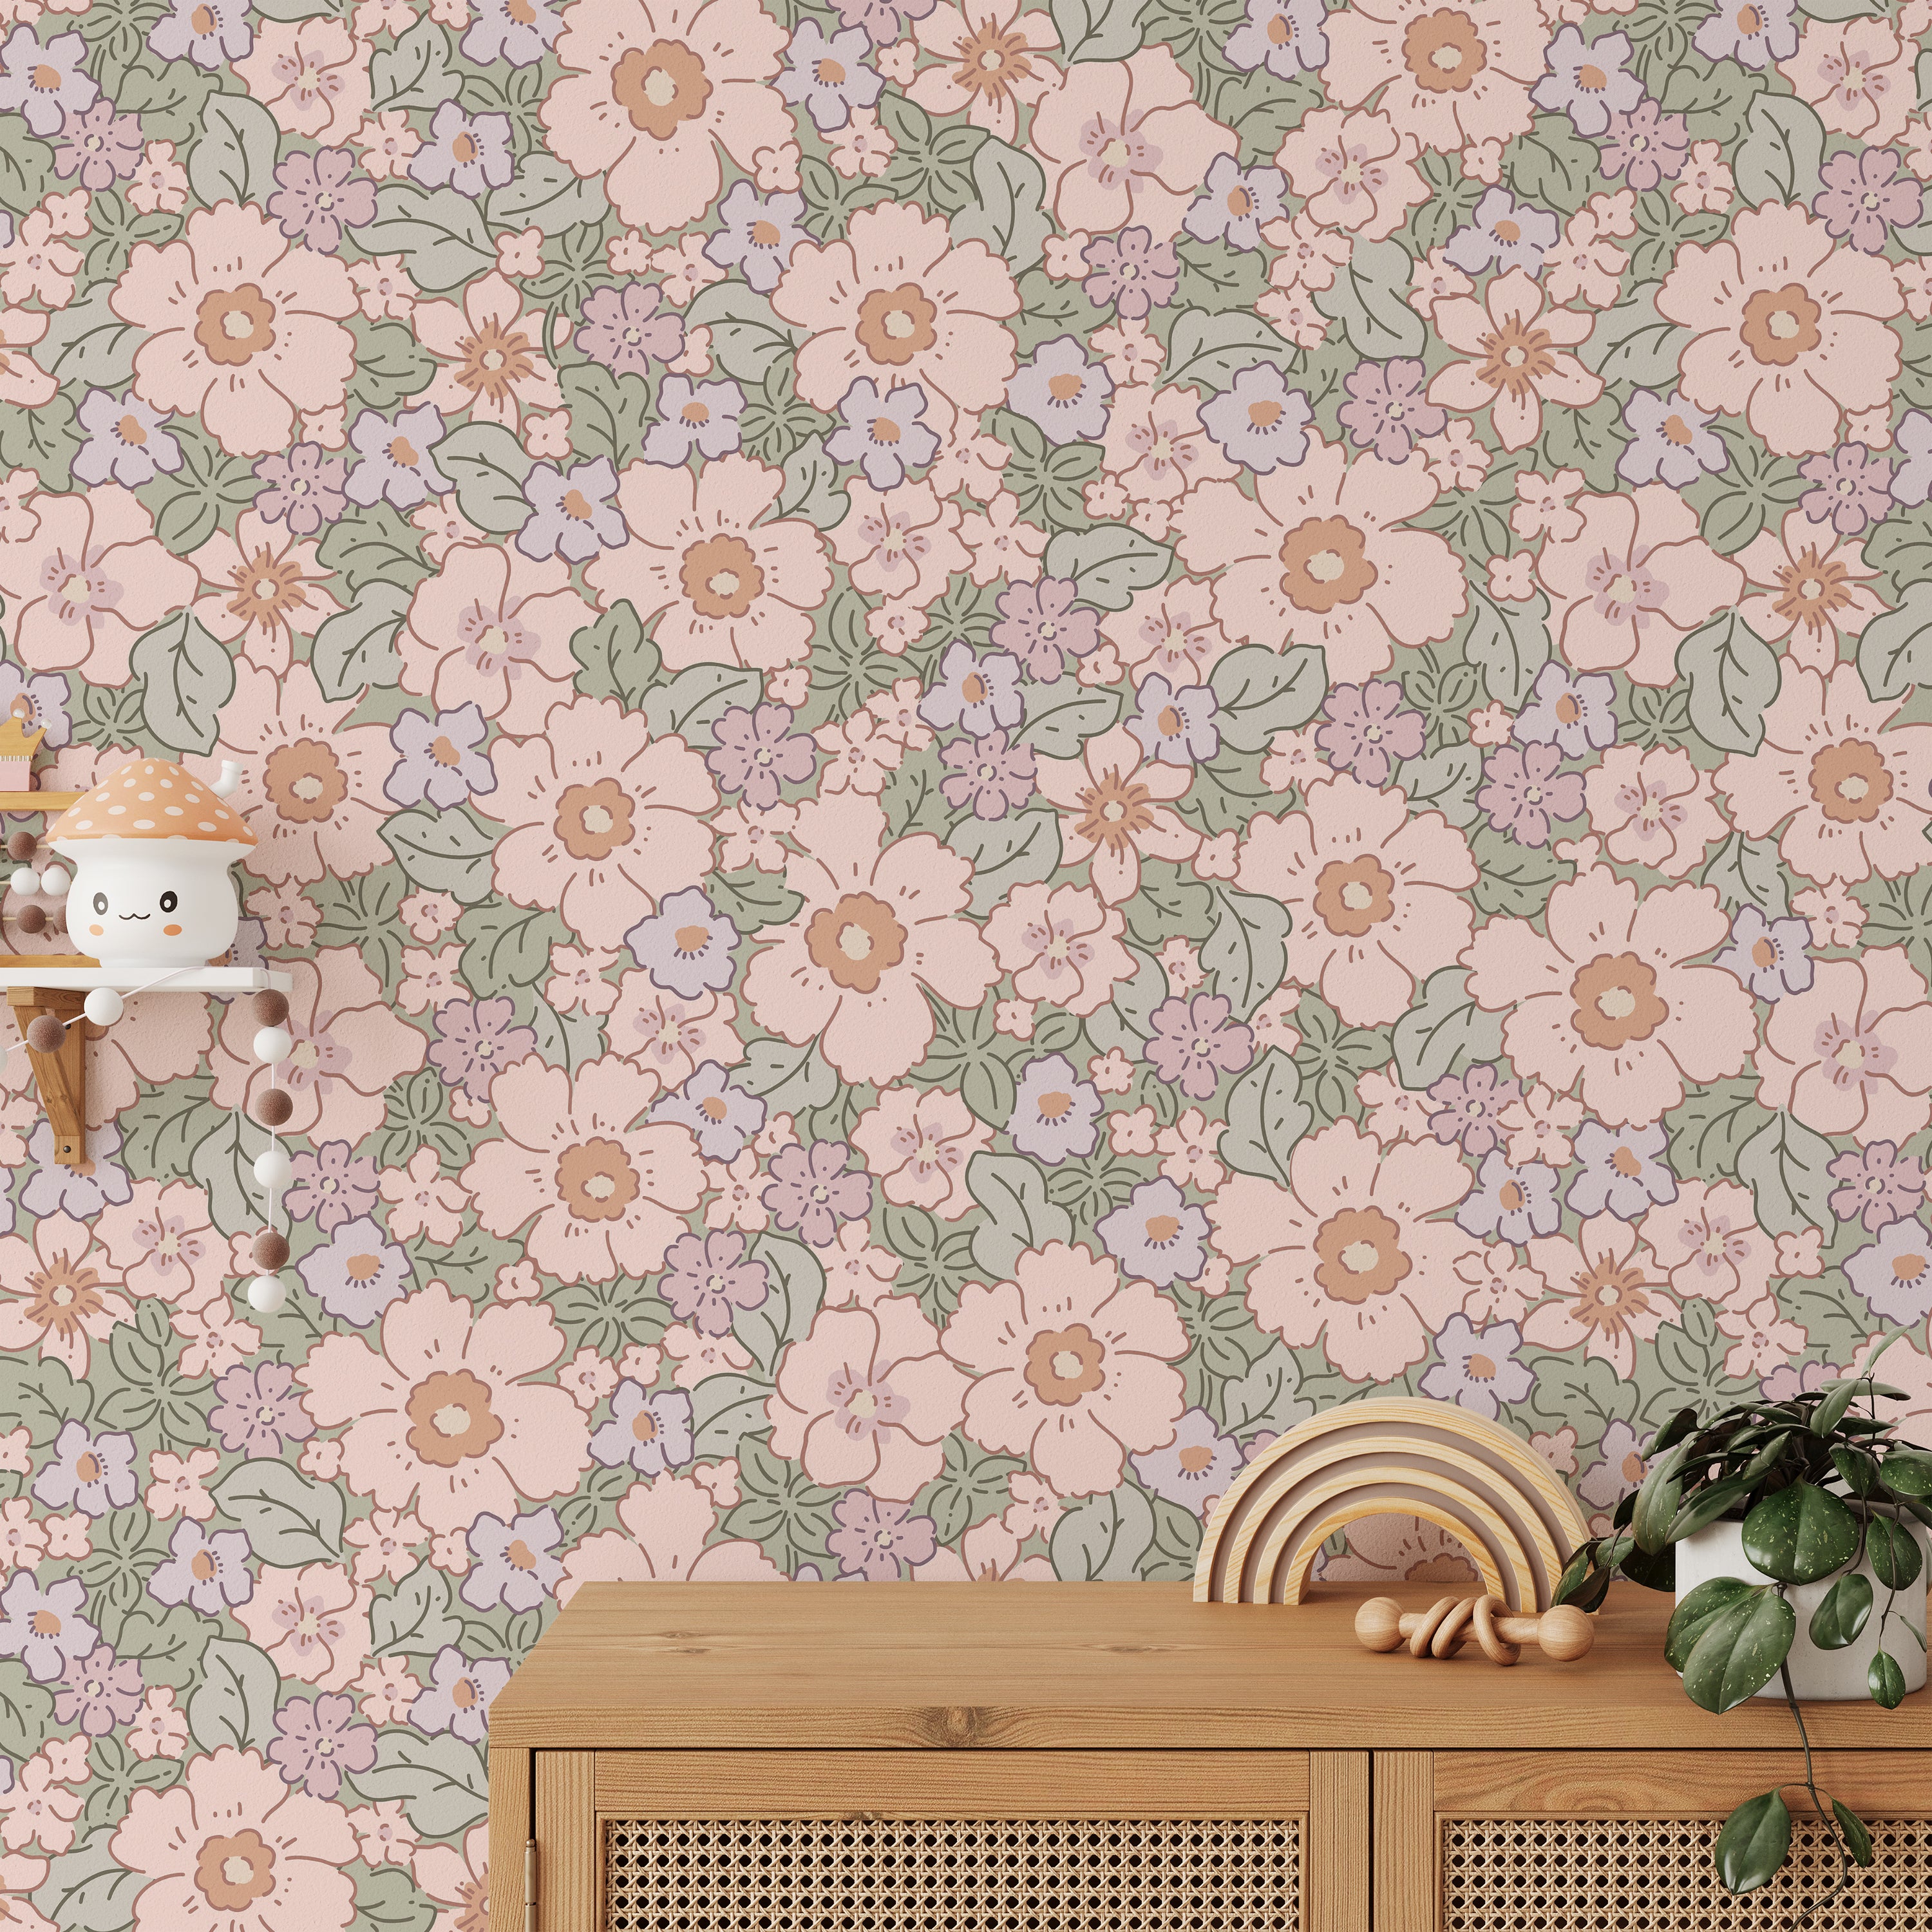 A charming nursery room decorated with Floral Joy Wallpaper, showcasing a rich floral pattern in soft pastel colors that complement the playful children's toys and wooden furniture, enhancing the room's whimsical atmosphere